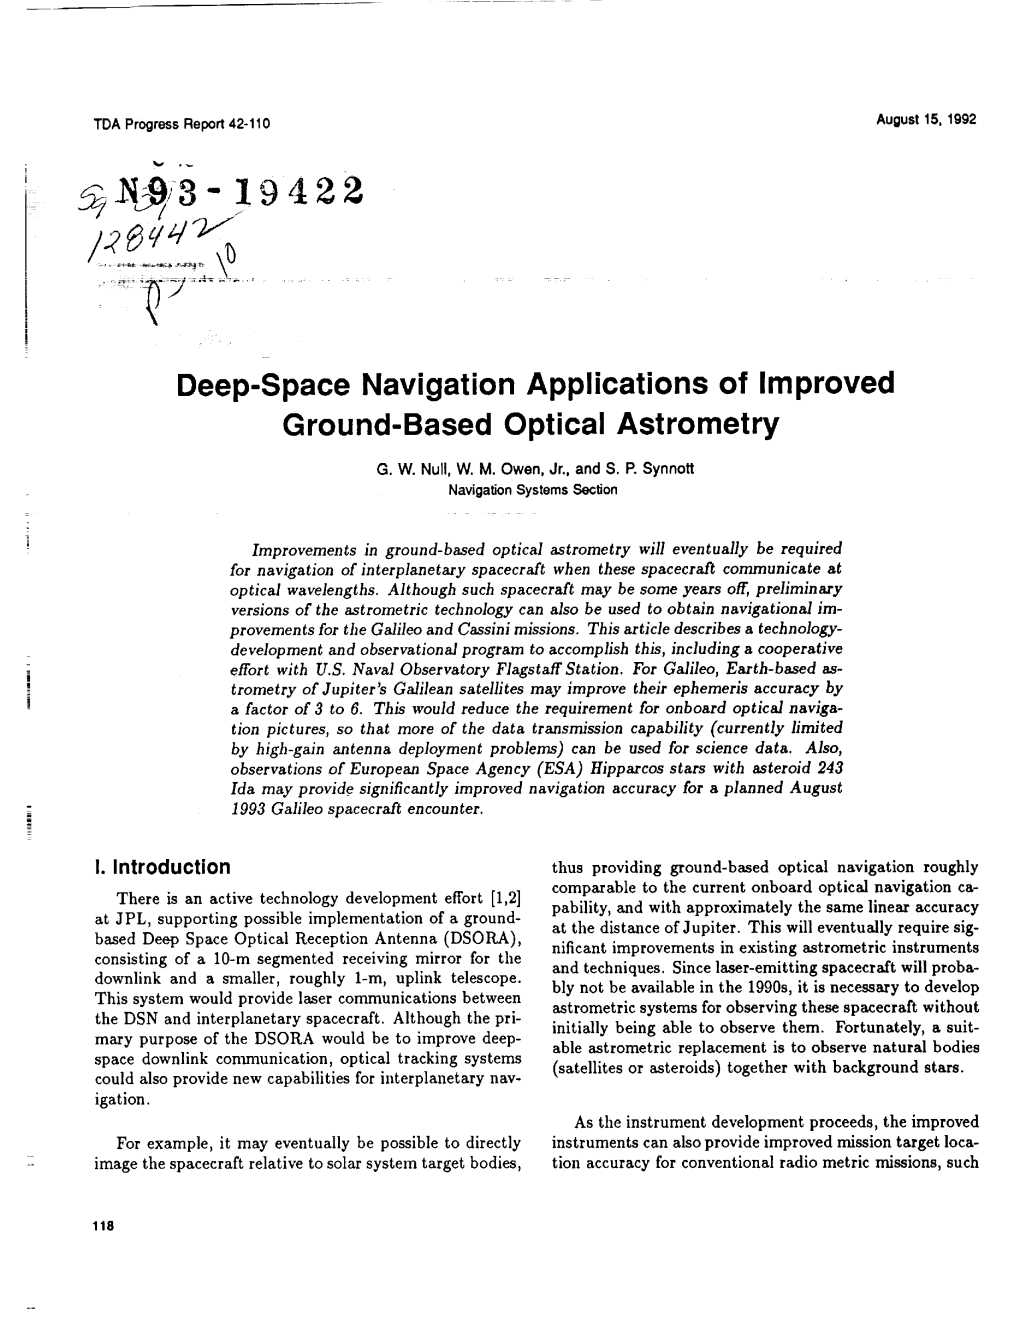 Deep-Space Navigation Applications of Improved Ground-Based Optical Astrometry